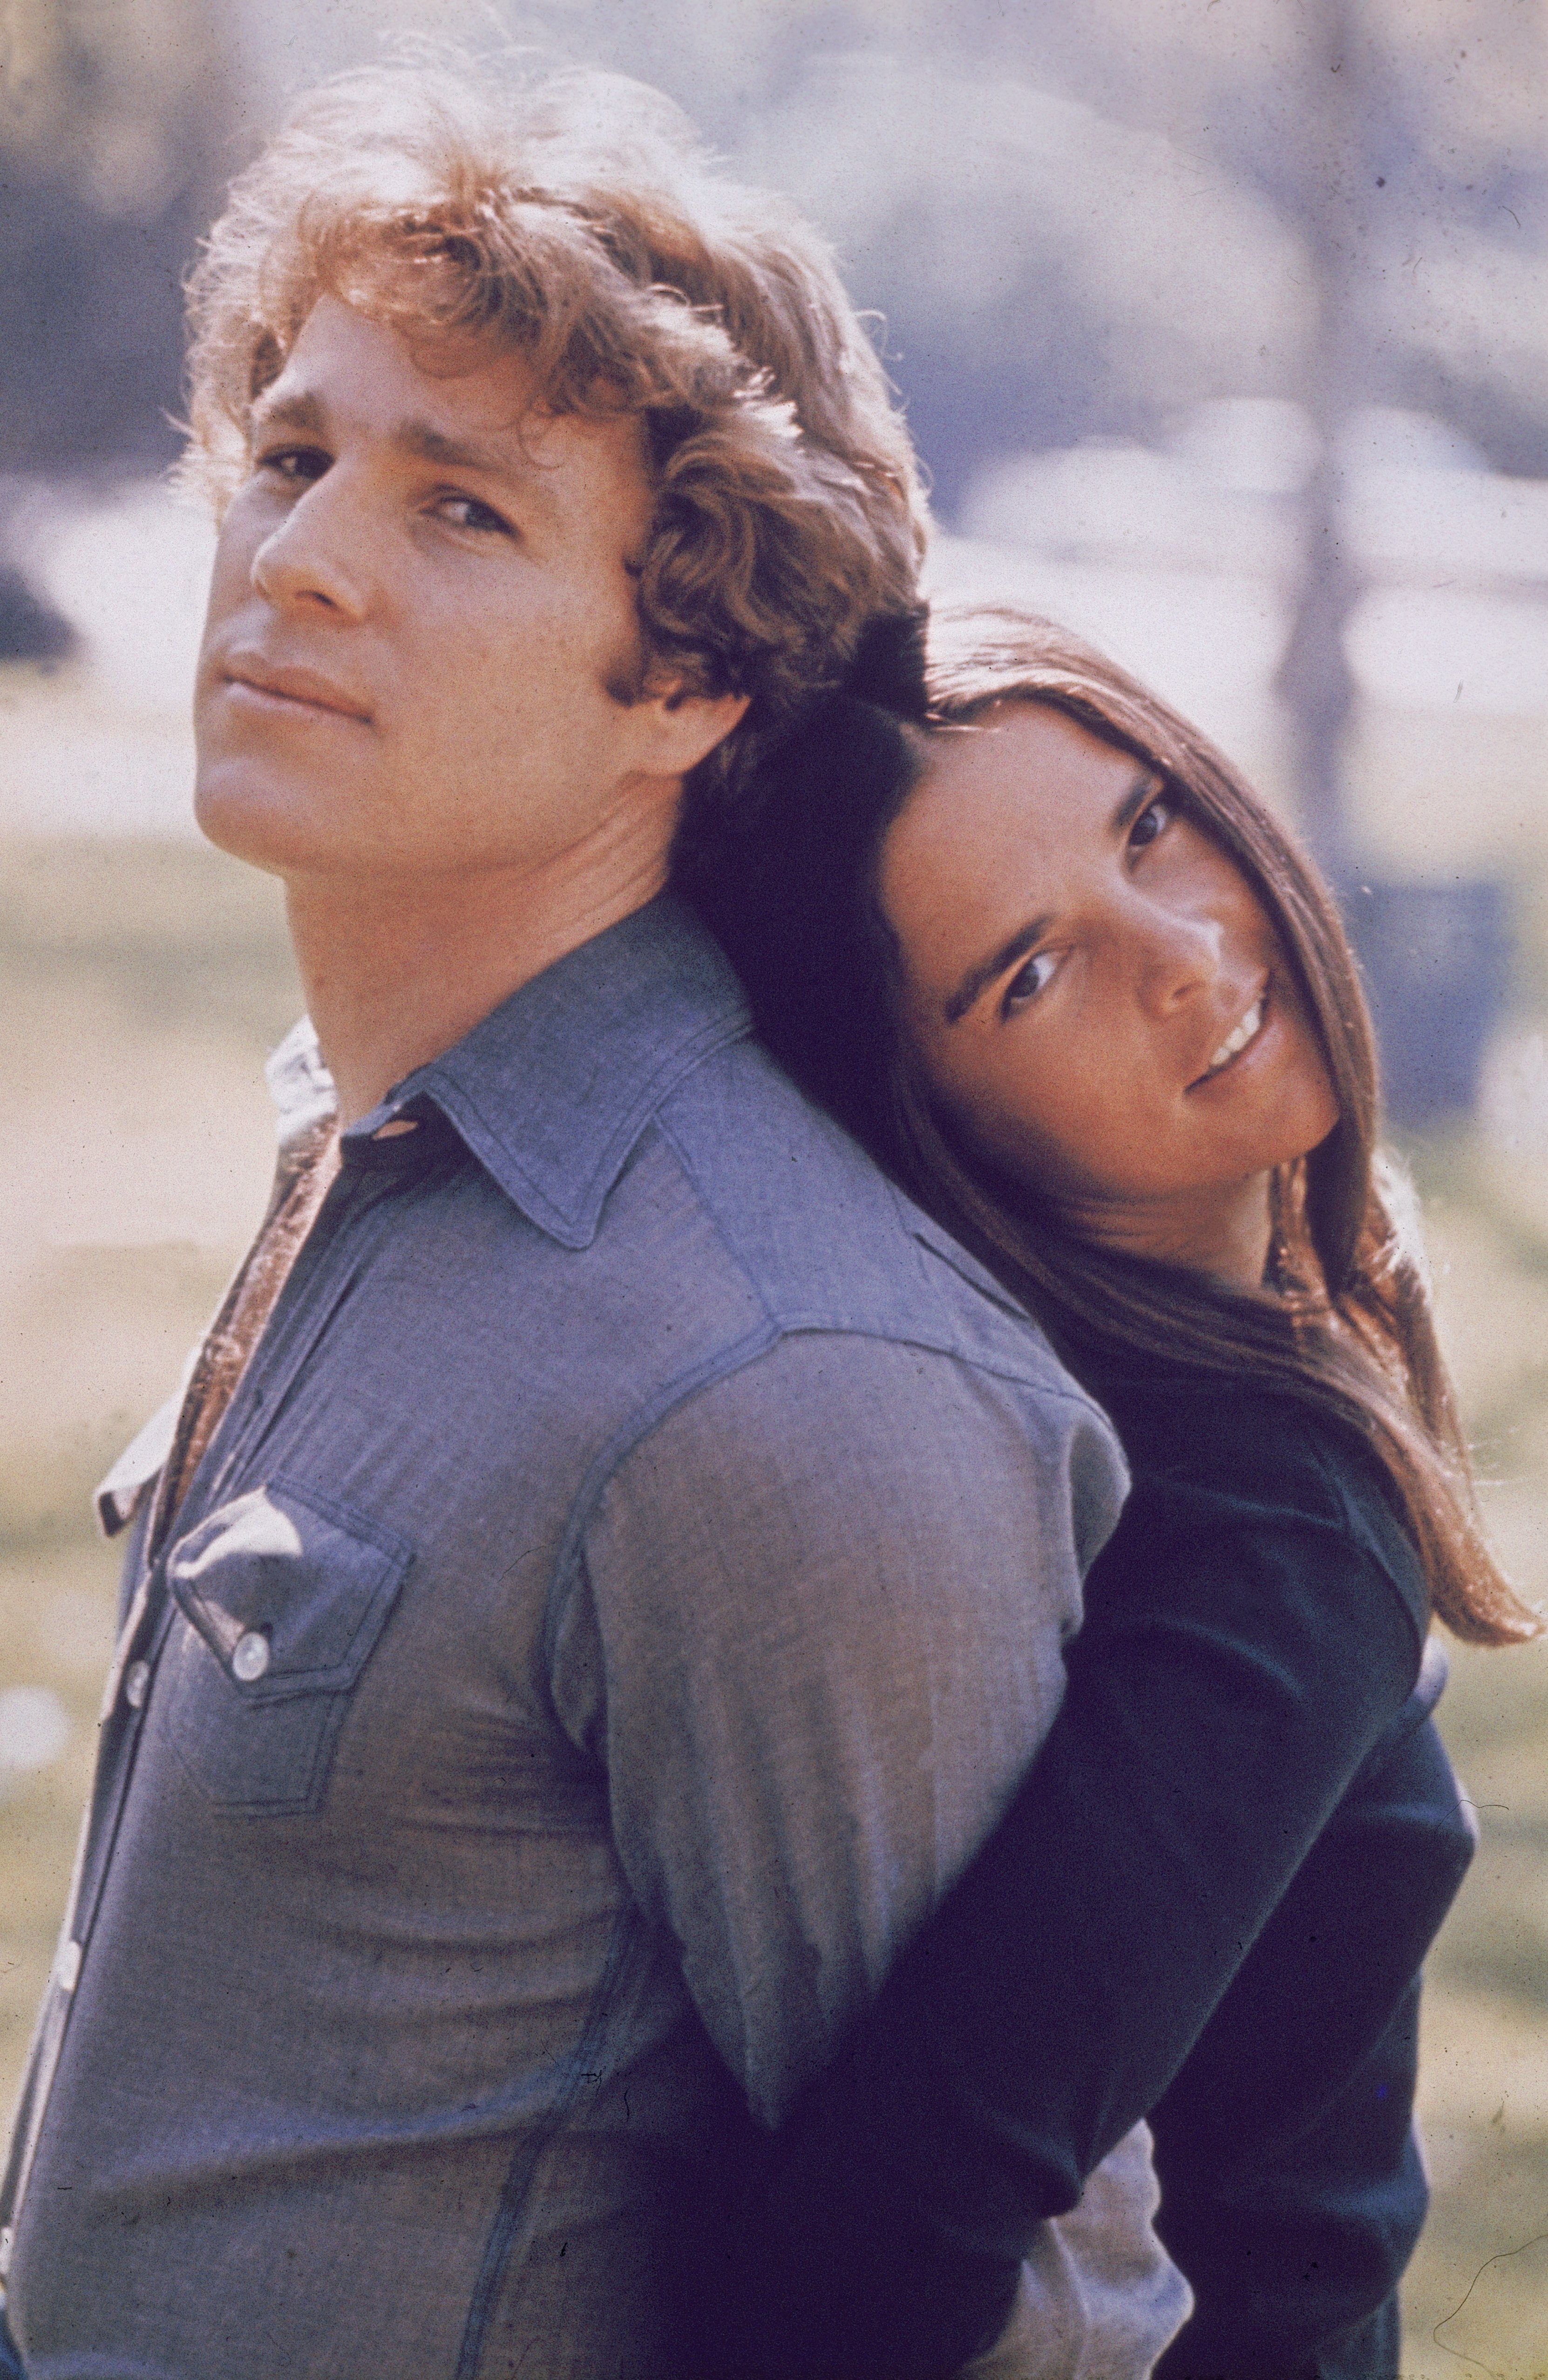 Ryan O'Neal and Ali MacGraw stand back to back outdoors in a still from the 1970 film, "Love Story." | Source: Getty Images